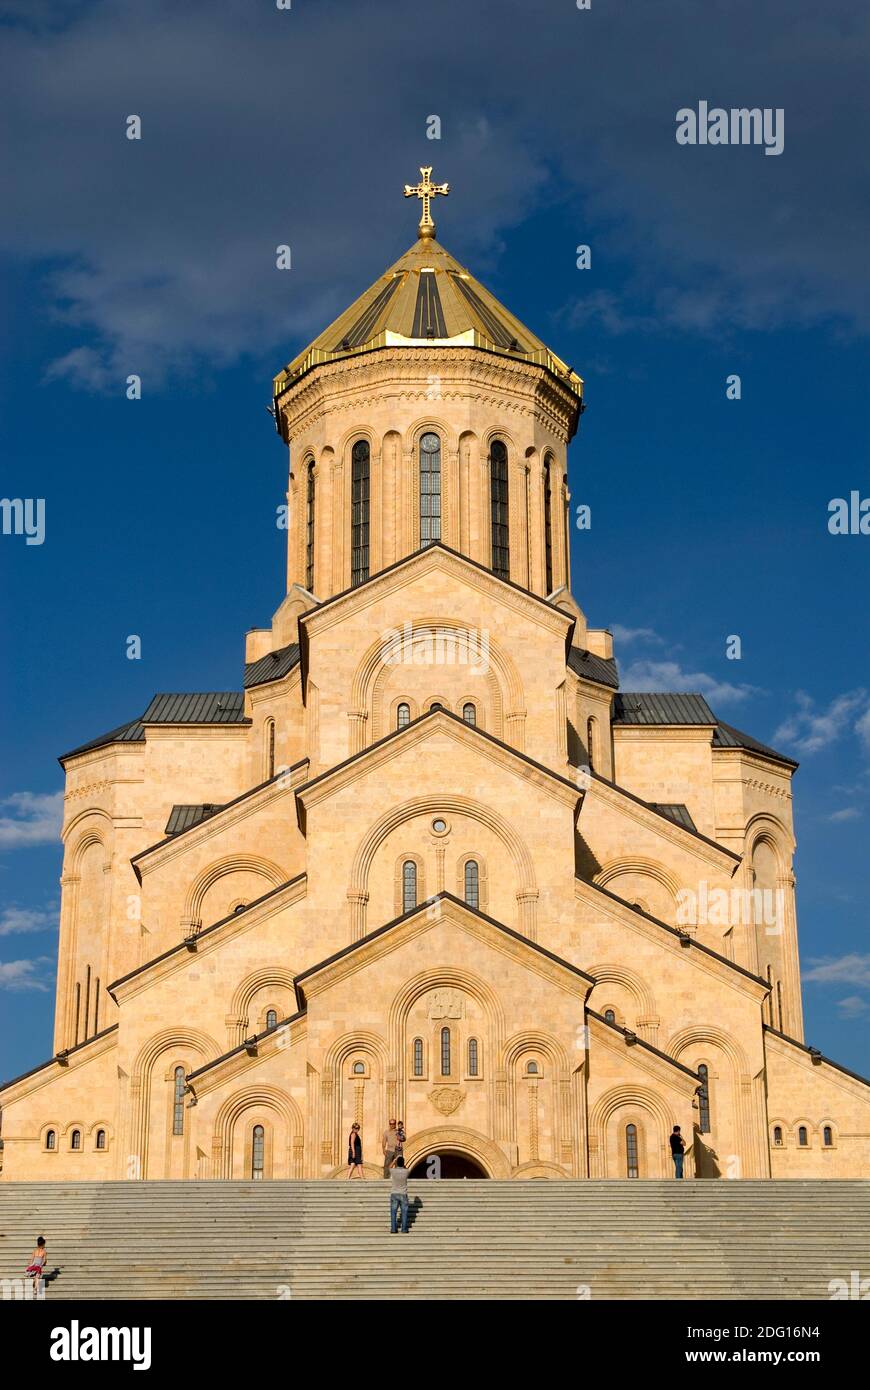 The Tbilisi Holy Trinity Cathedral commonly known as Sameba is the main Georgian Orthodox Christian cathedral, located in Tbilisi, Georgia Stock Photo